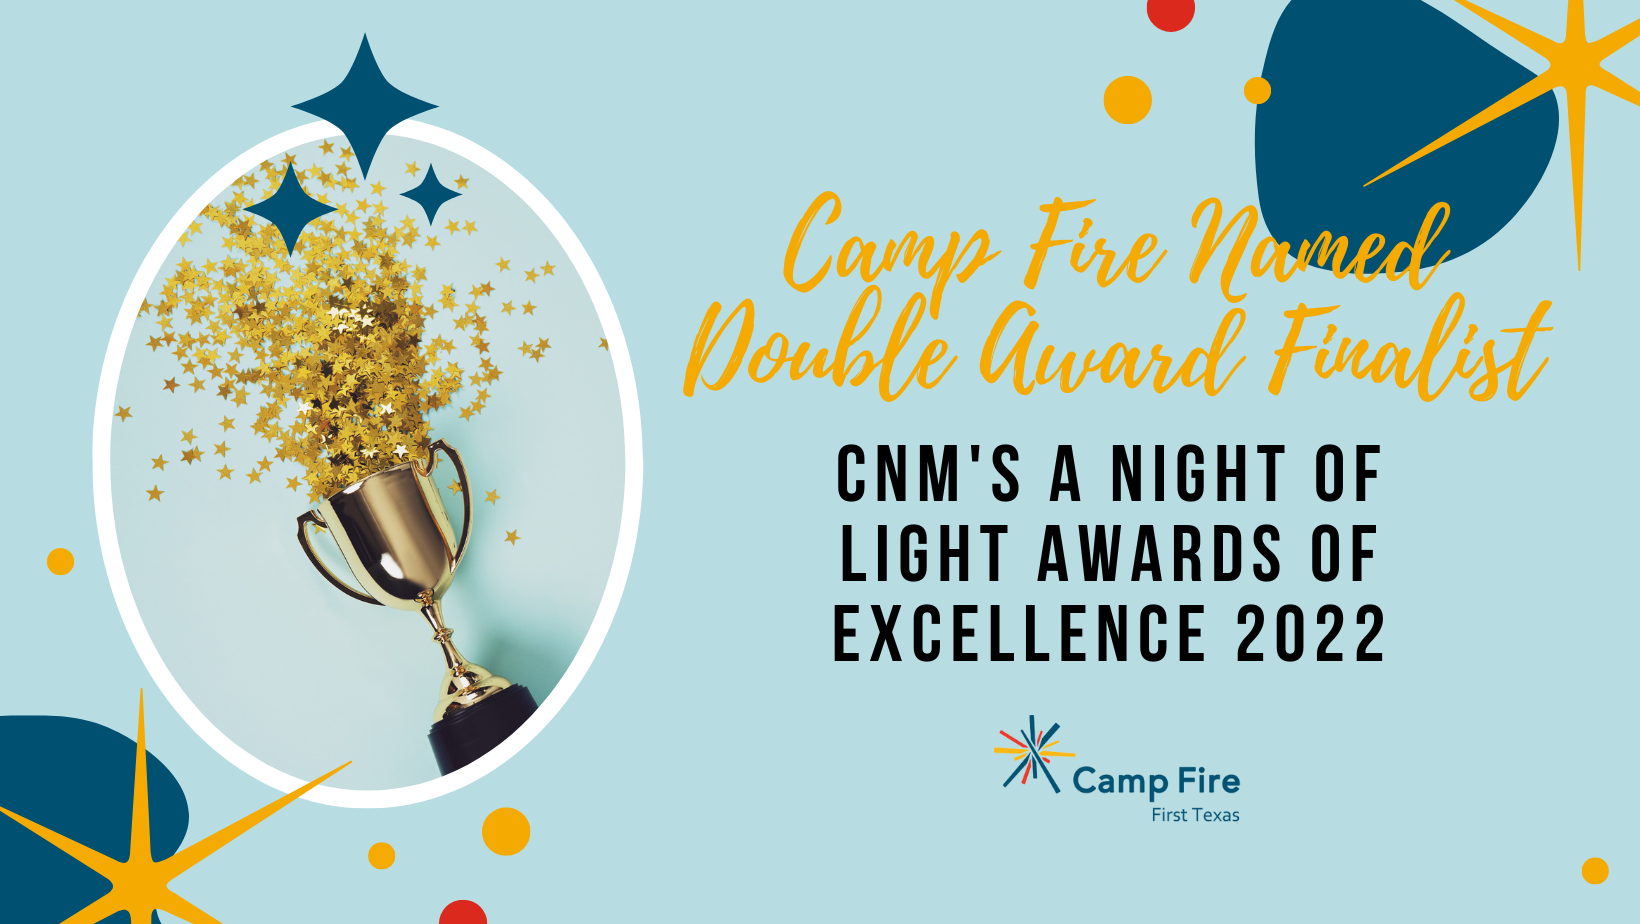 Camp Fire Named Double Award Finalist: CNM's A Night of Light Awards of Excellence 2022, a Camp Fire First Texas blog